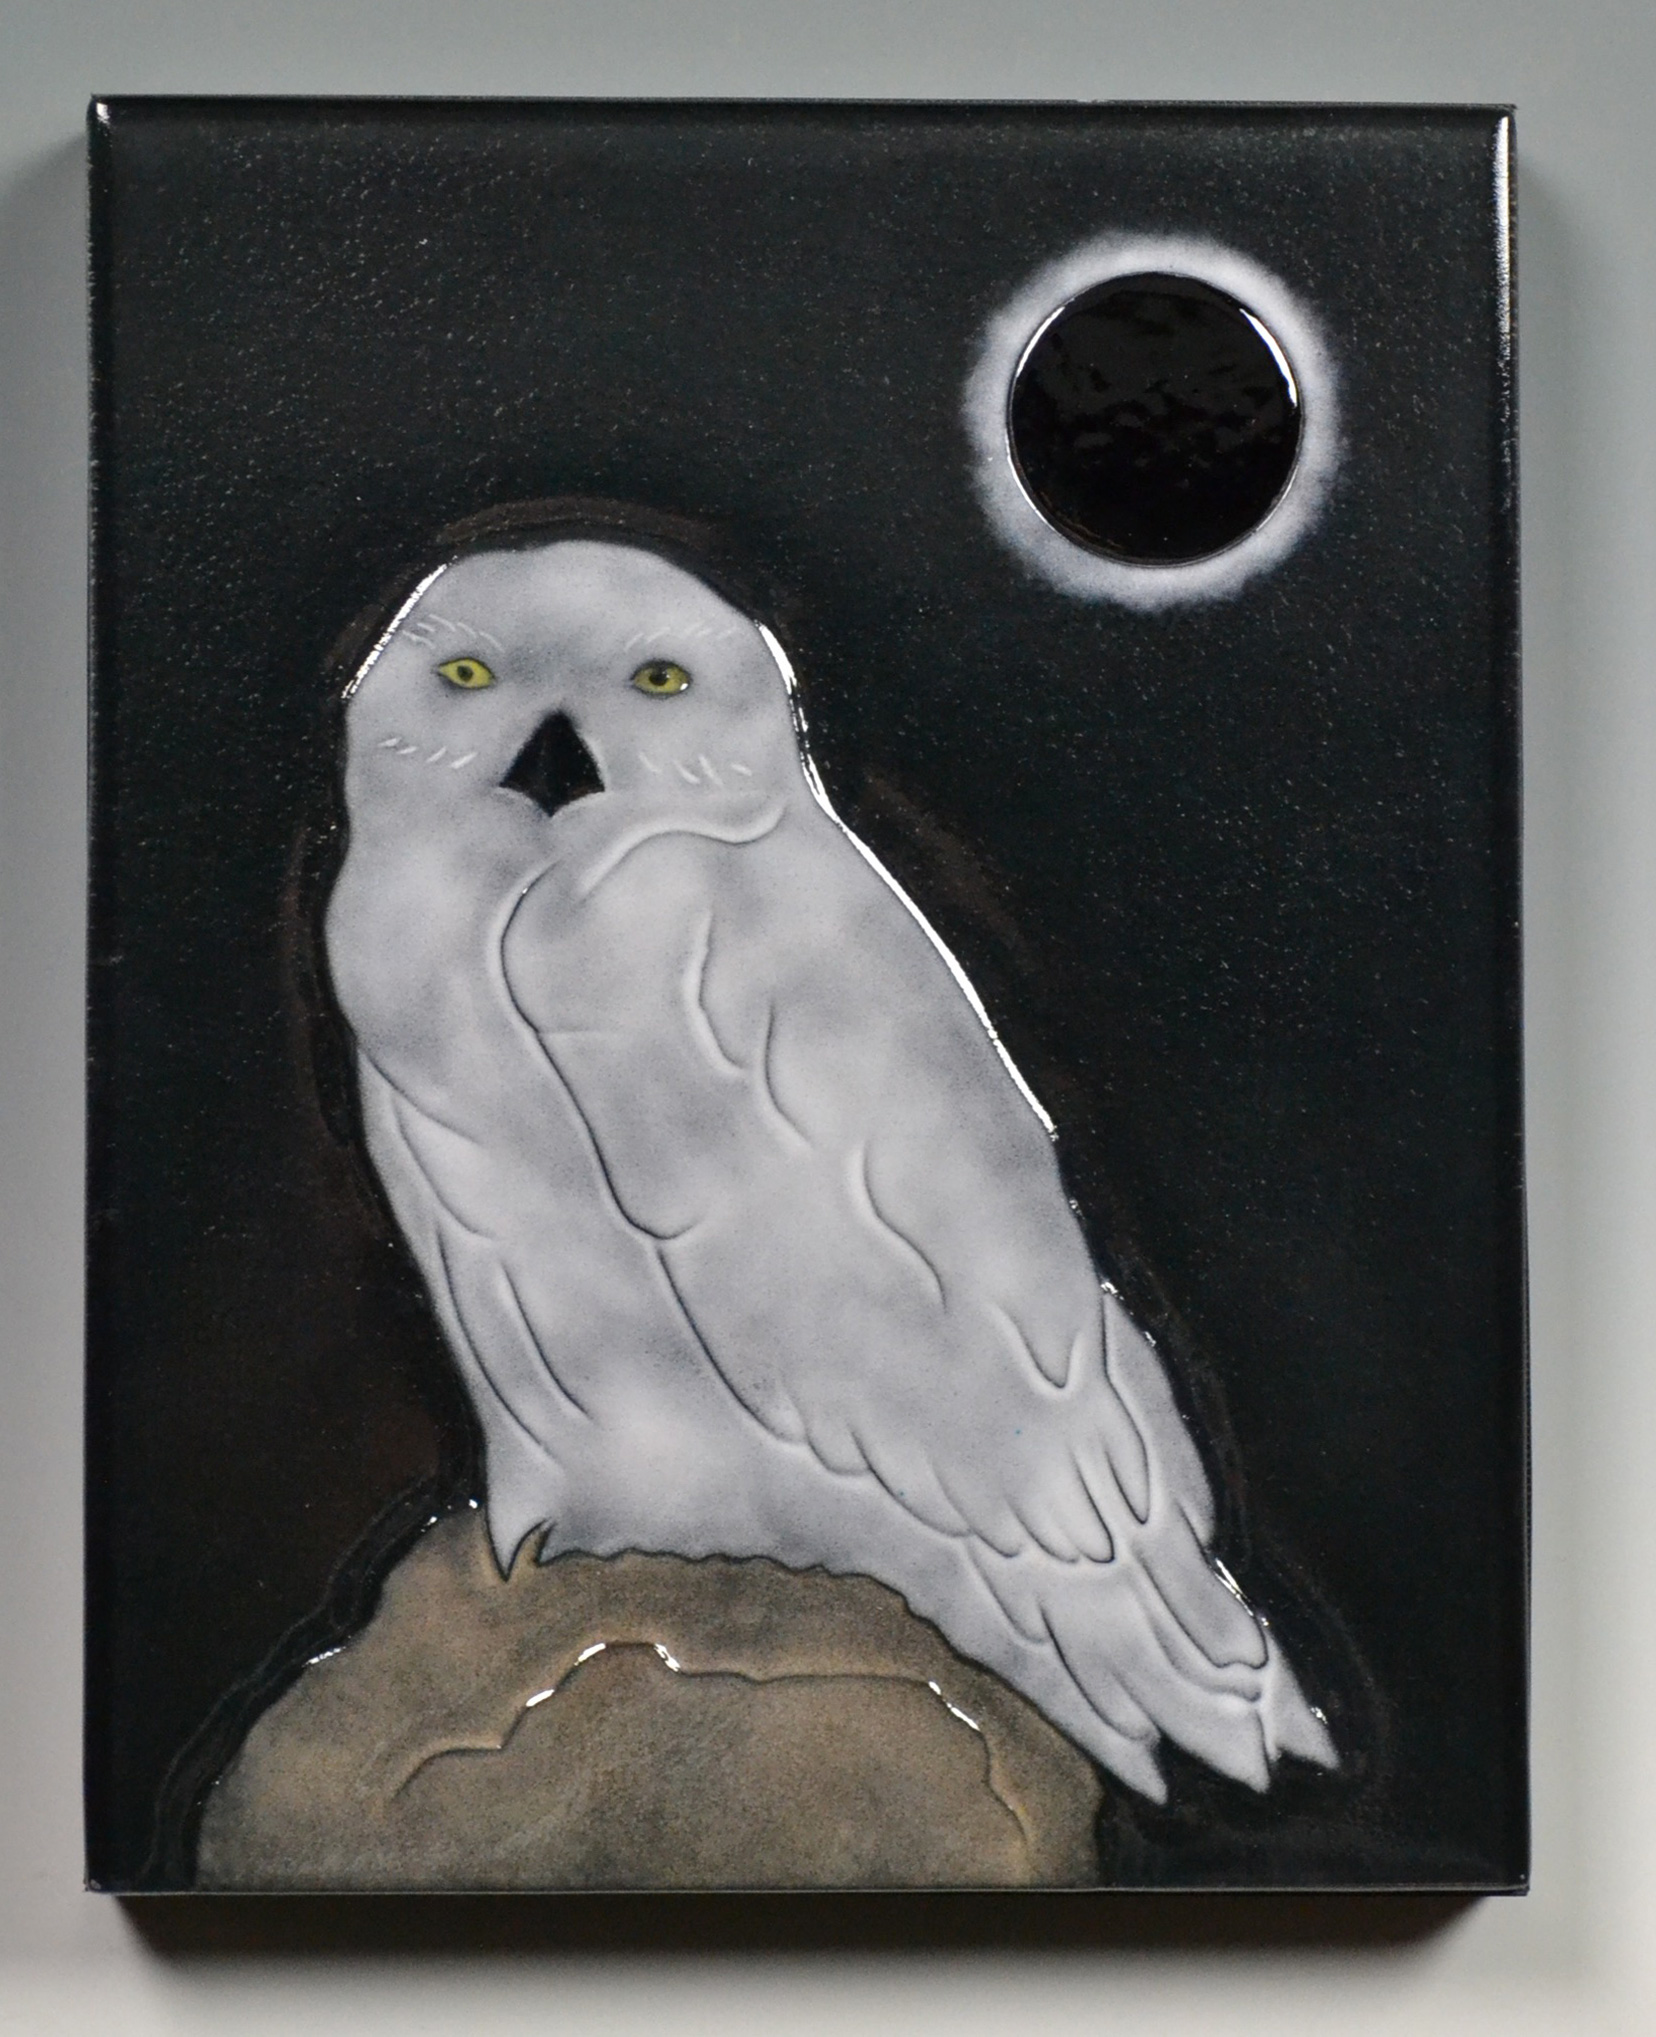 Whooo…Turned Out the Lights (Eclipse Owl)